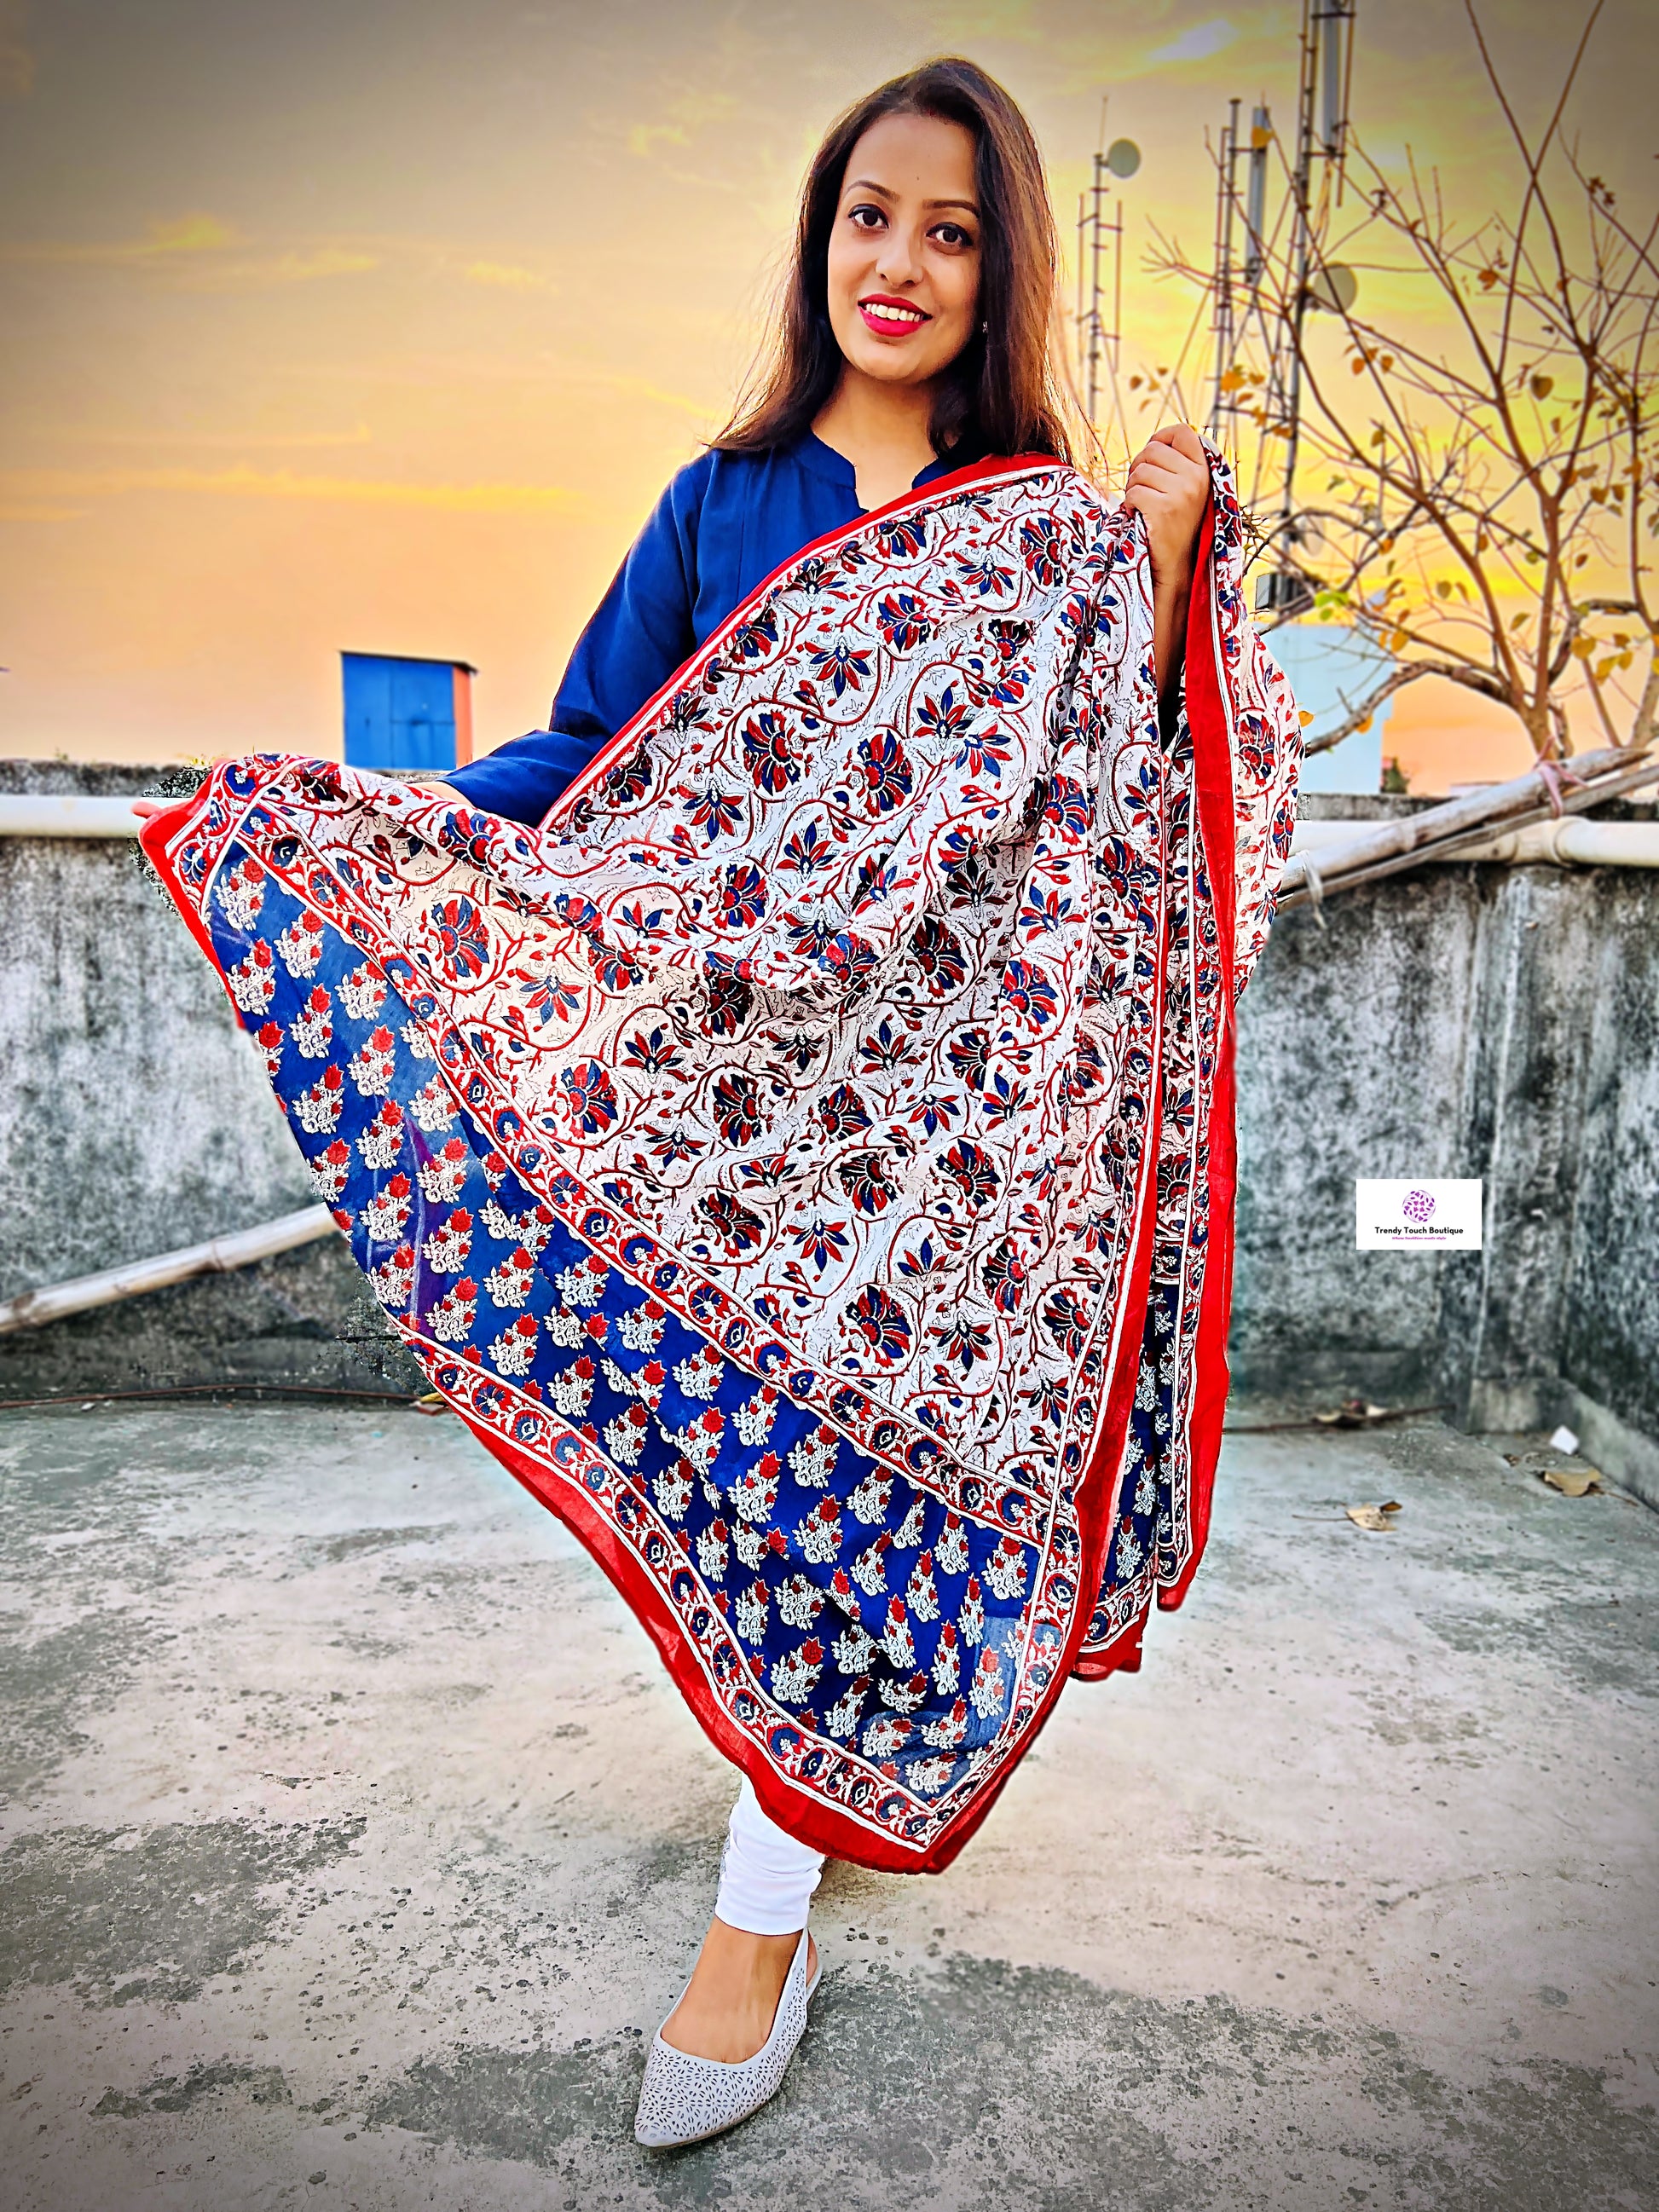 Mulcotton blue red white floral prints handblock print dupattas for everyday summer kurti pairing for office and college wardrobe needs, best price, summer sale!